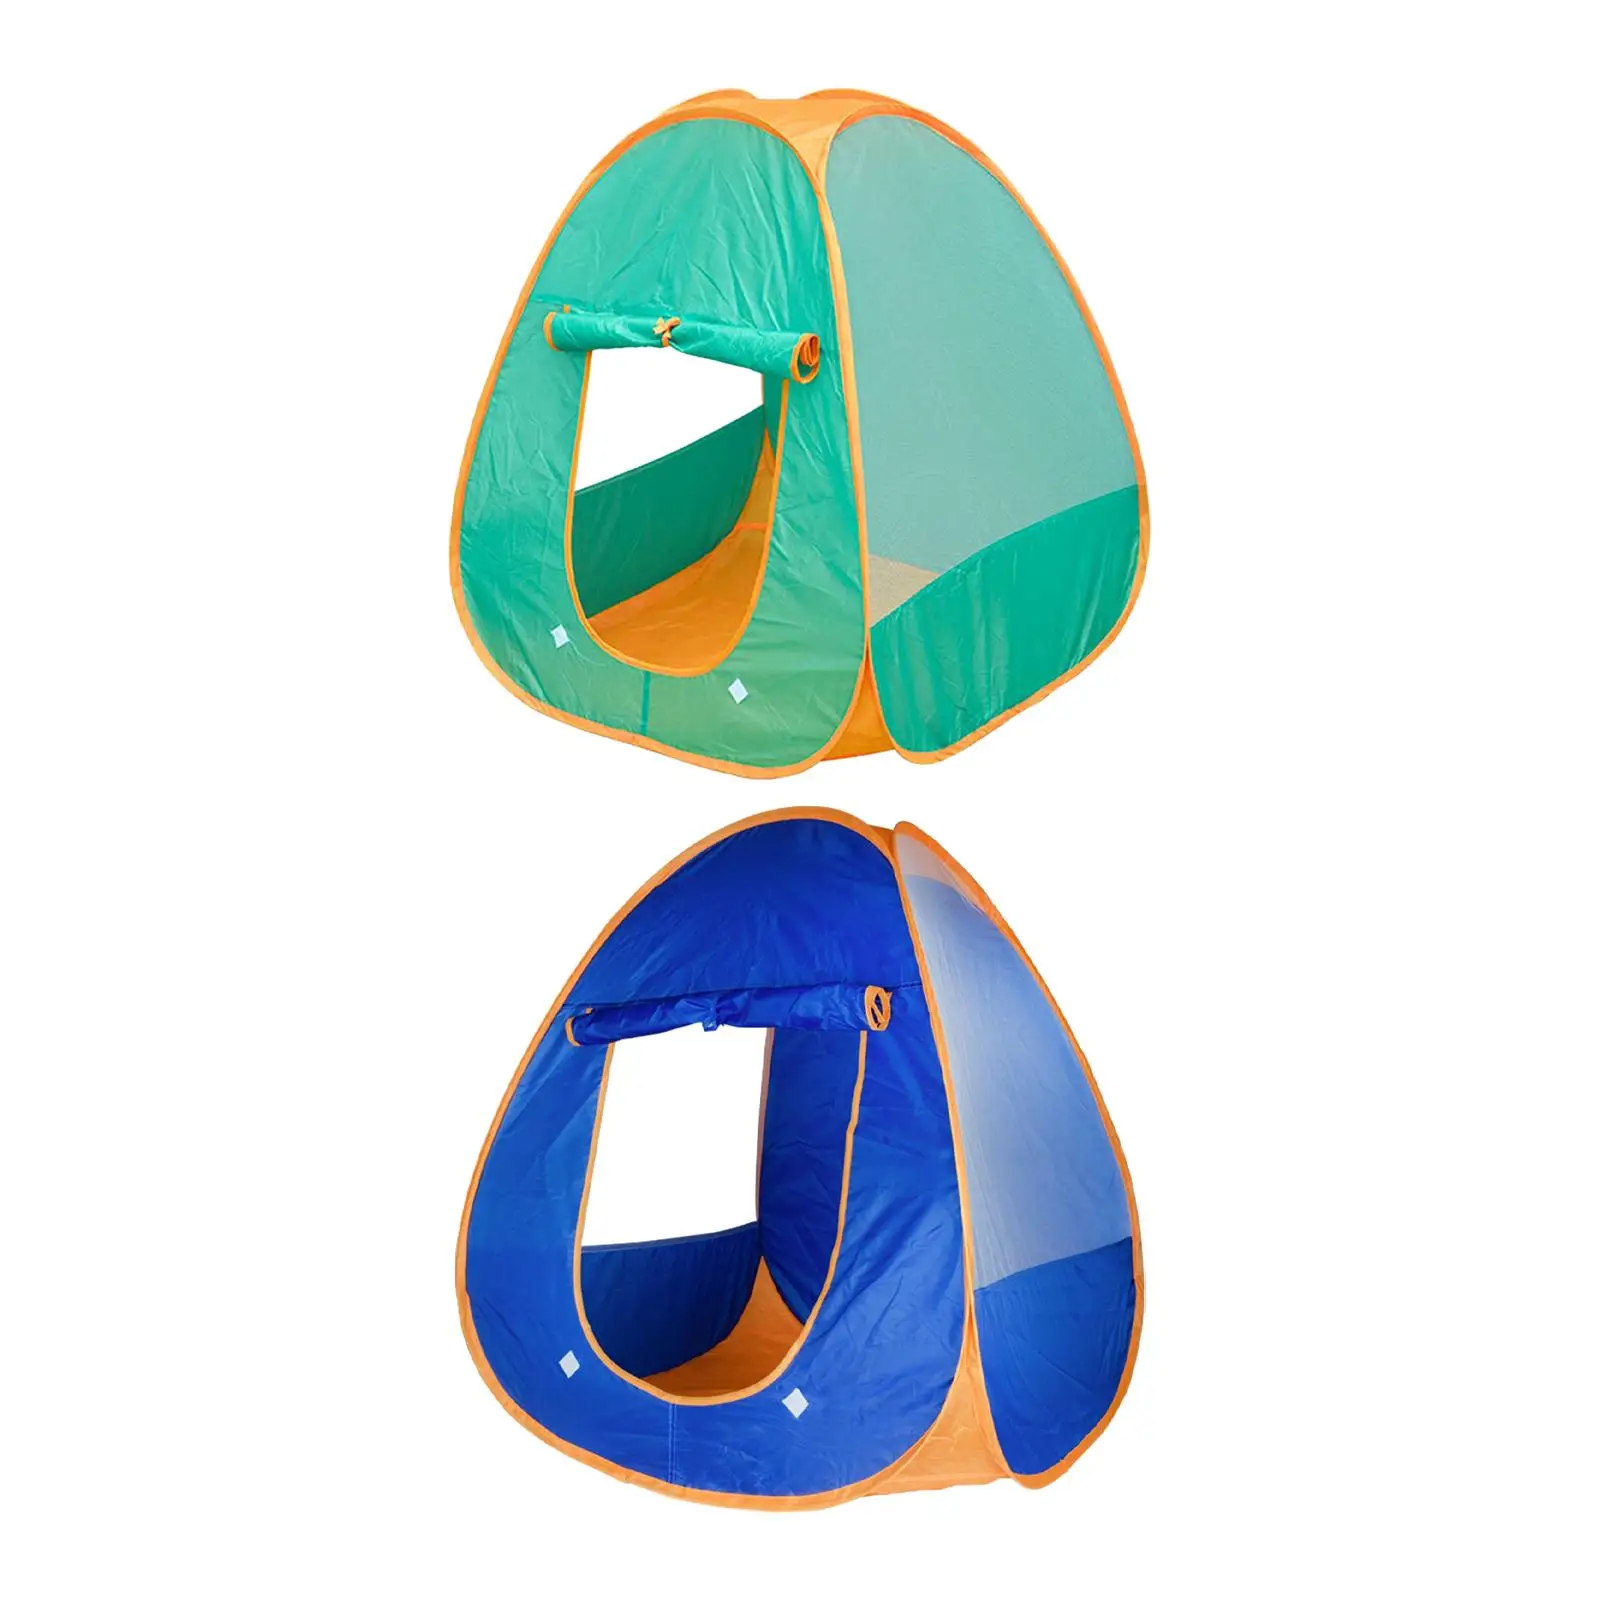 Children Play Tent Collapsible Playhouse Toys Role Play Toy Lightweight Christmas Gifts for Game Nursery Room Beach Camping Home